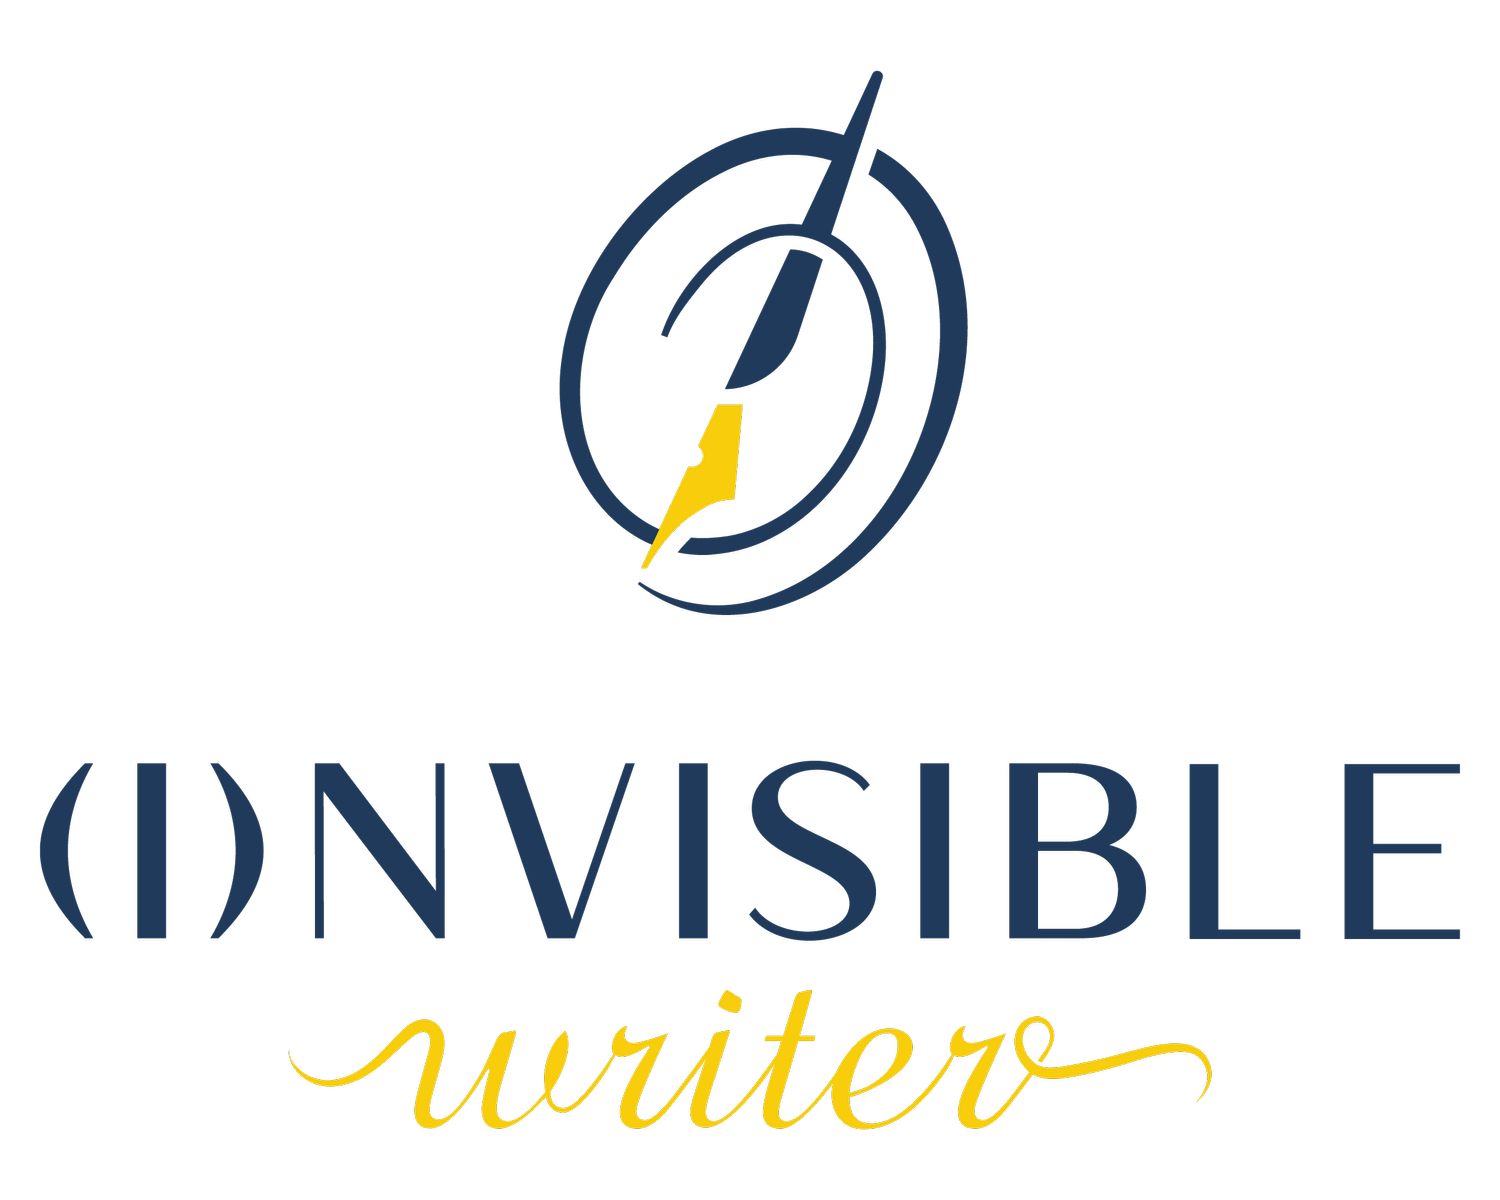 NvisibleWriter.com